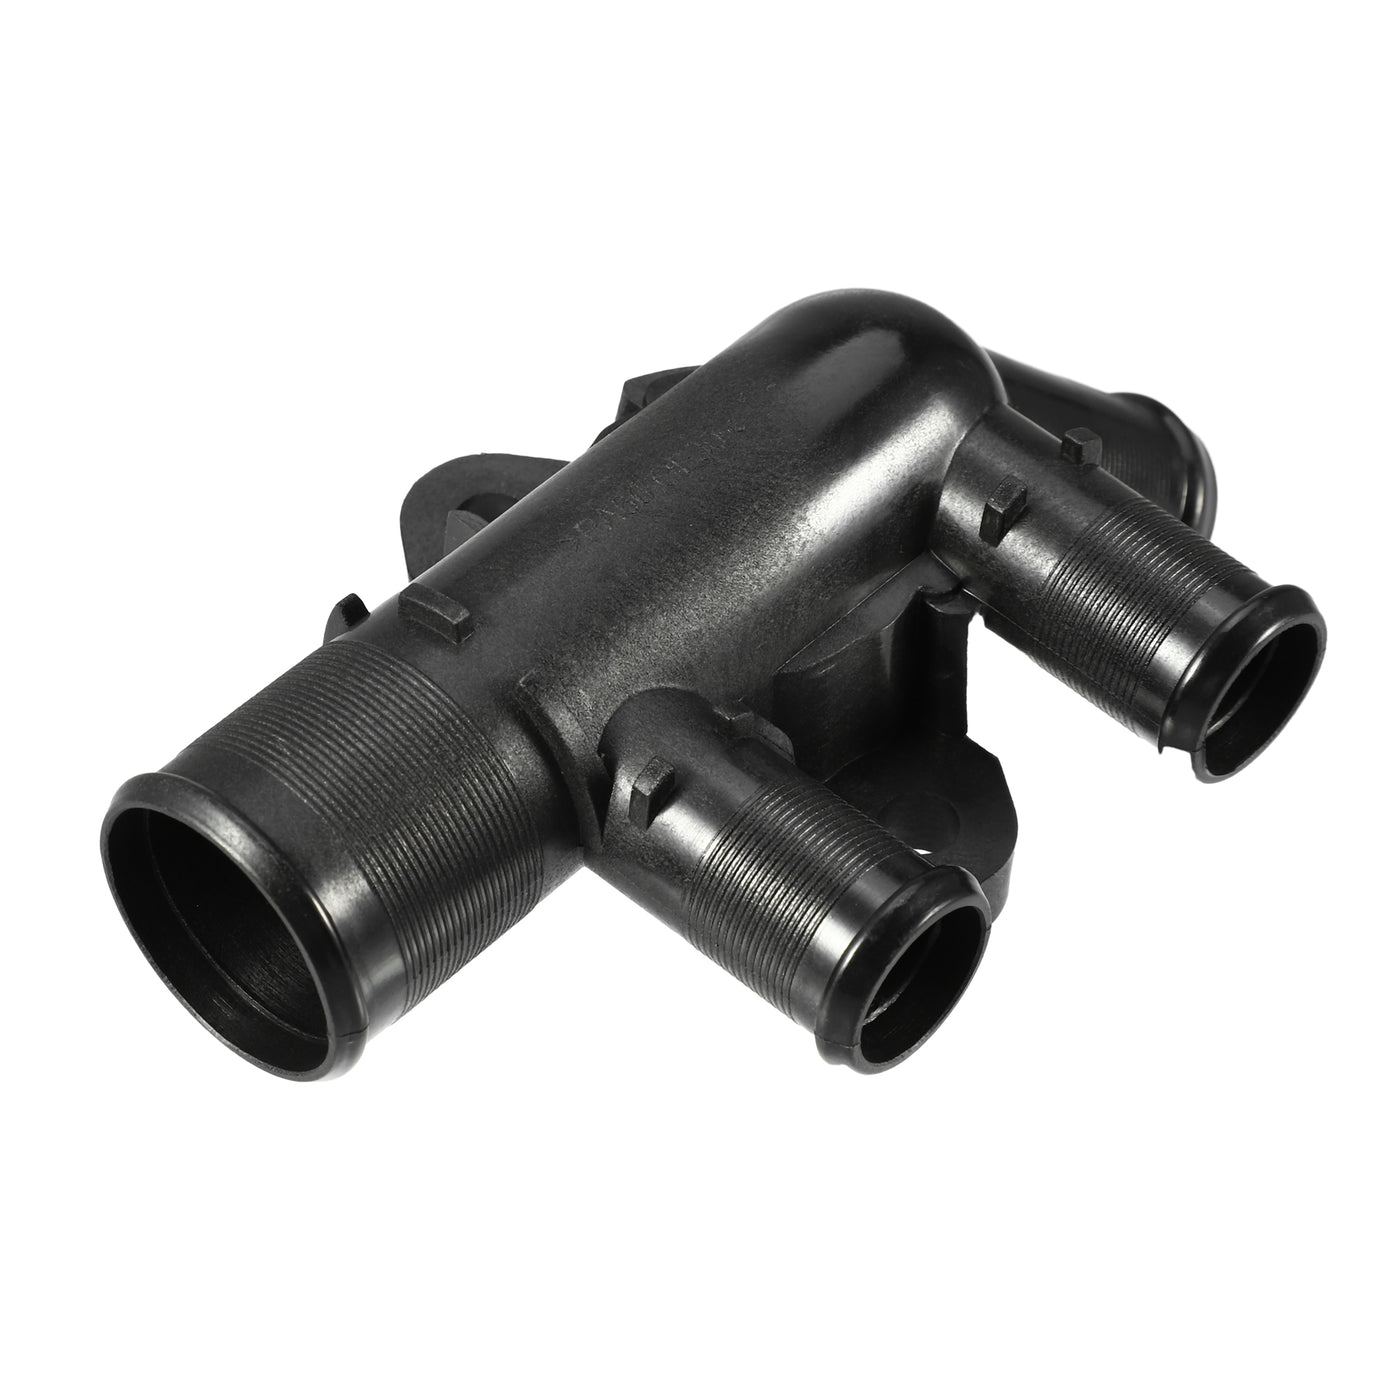 A ABSOPRO Coolant Thermostat Housing Cover No.1336G4 for Peugeot 306 405 406 806 Plastic Black